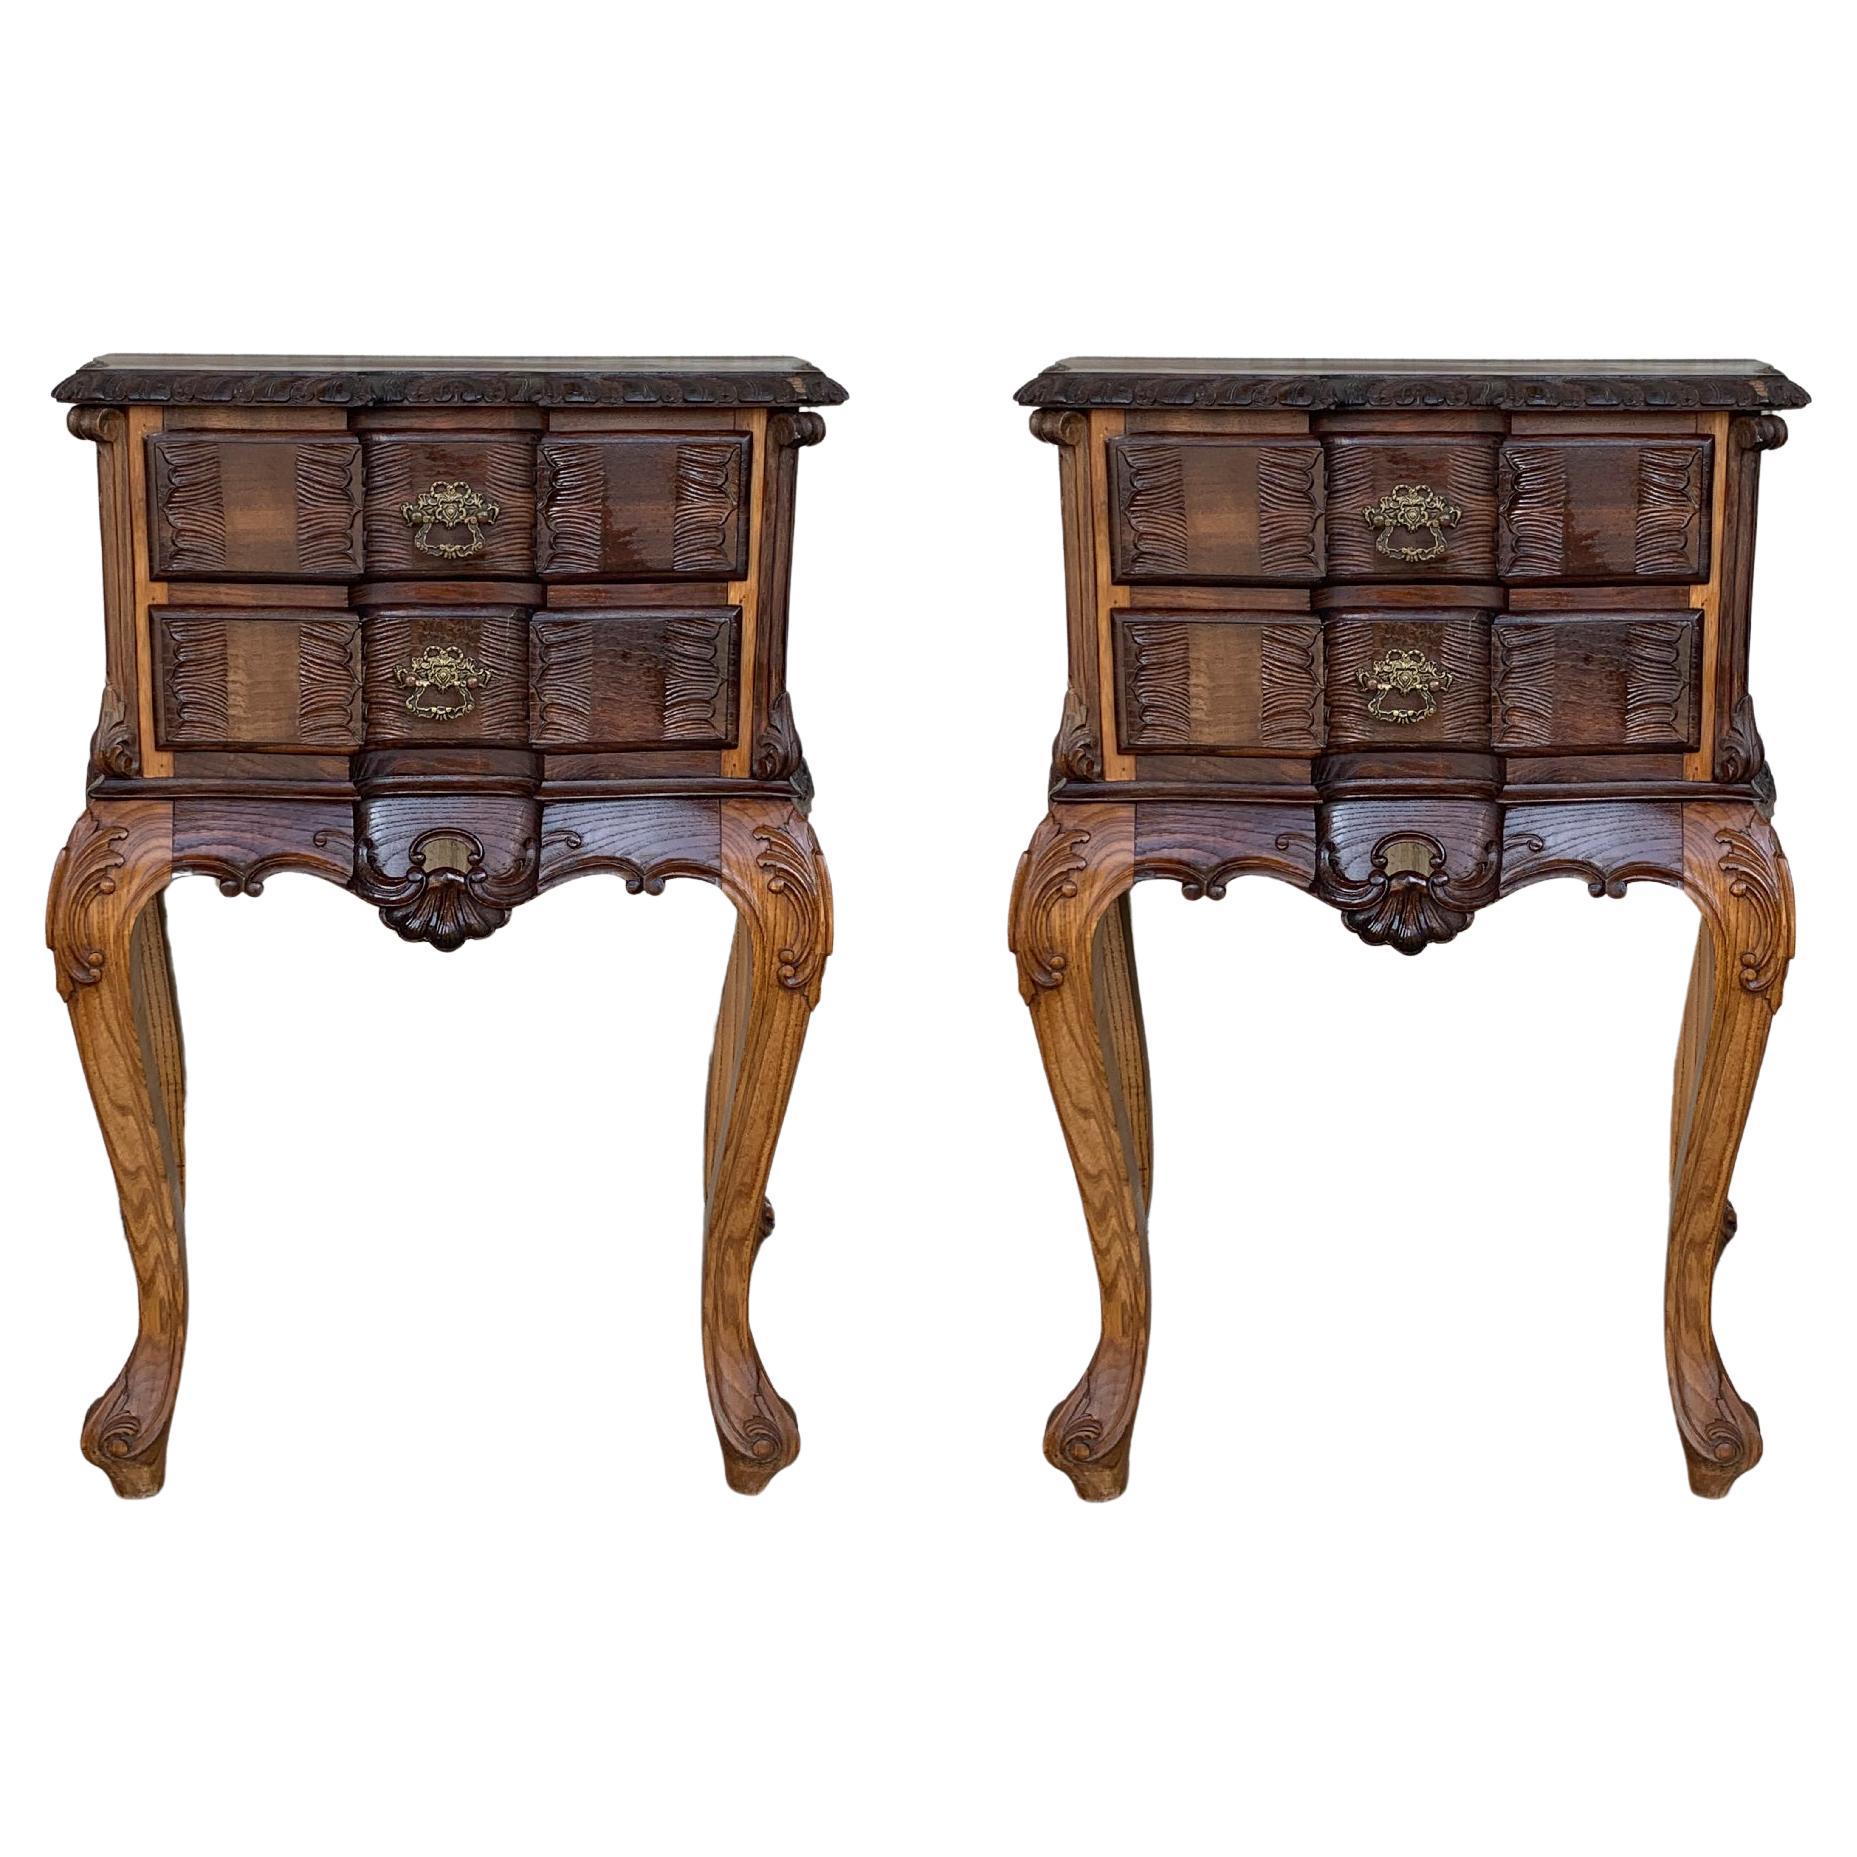 Bedsides Tables with Carved Drawers and Cabriole Legs, France